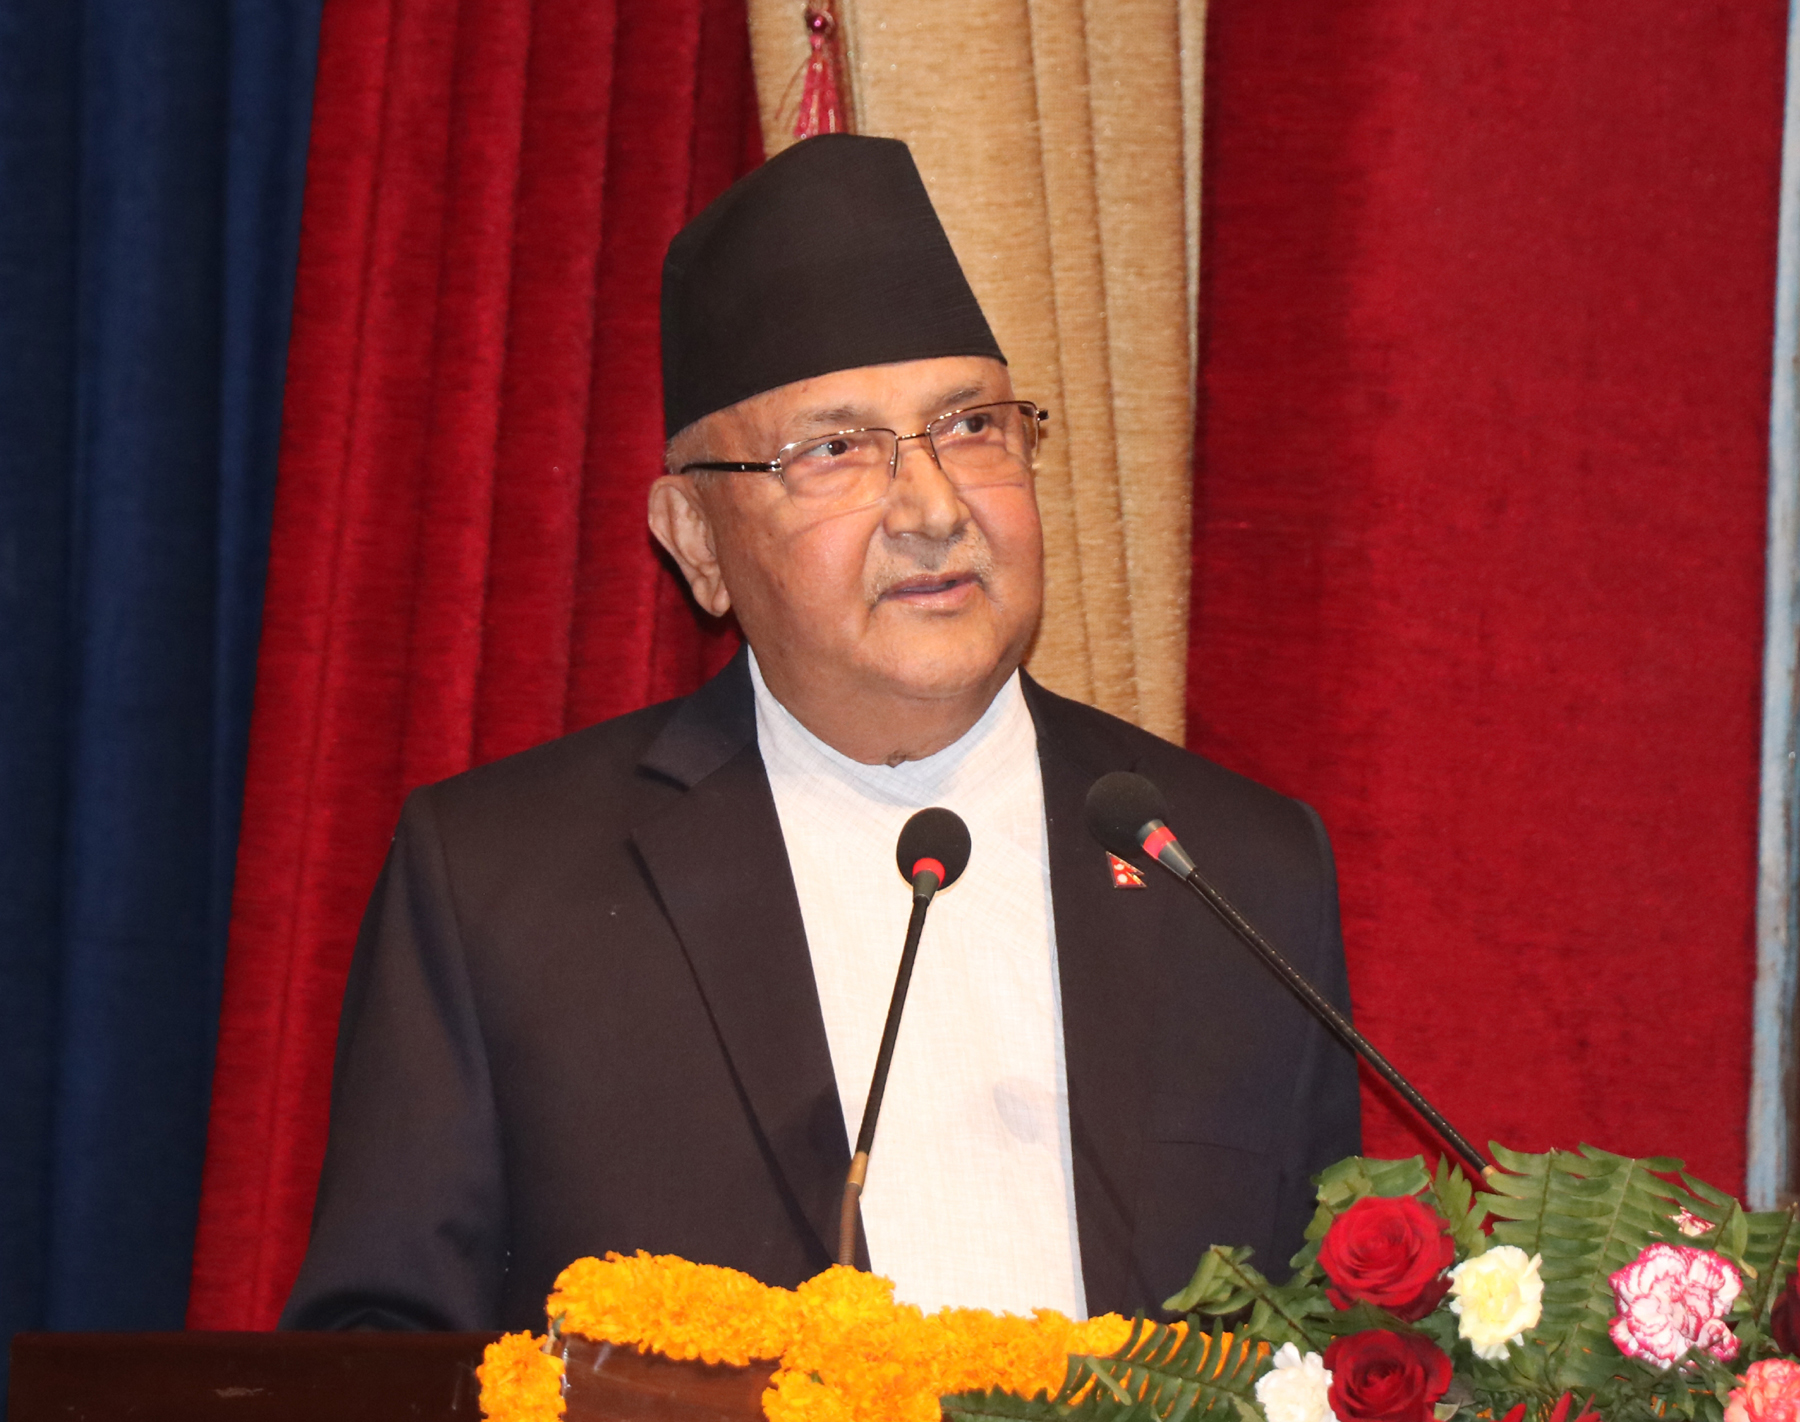 PM Oli at Grande Hospital for further treatment